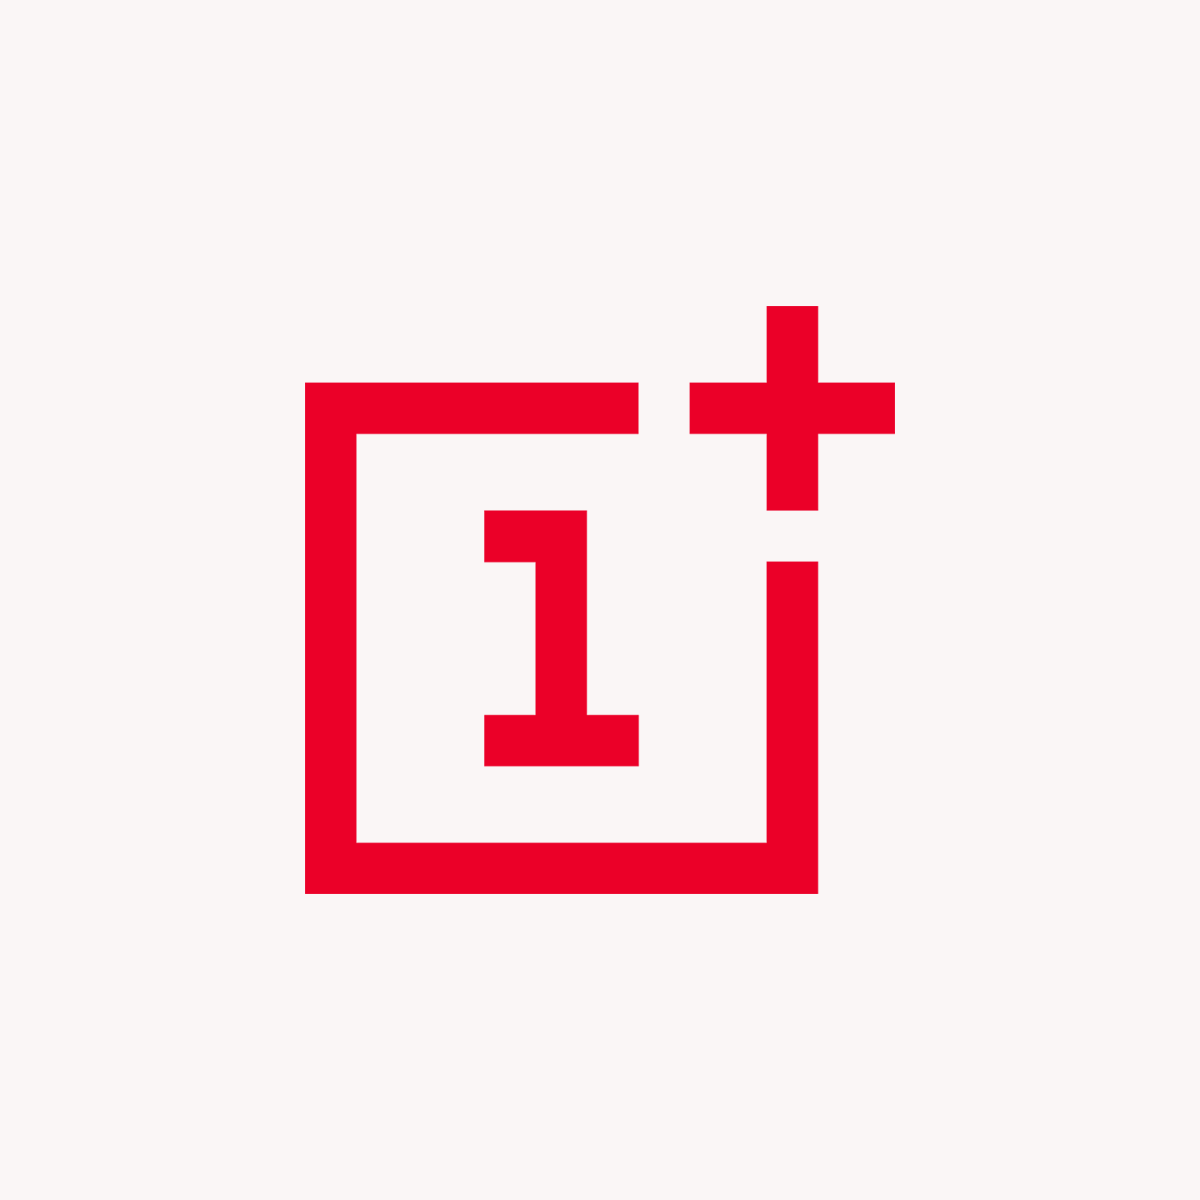 Red Block with White Cross Logo - Never Settle - OnePlus (United States)